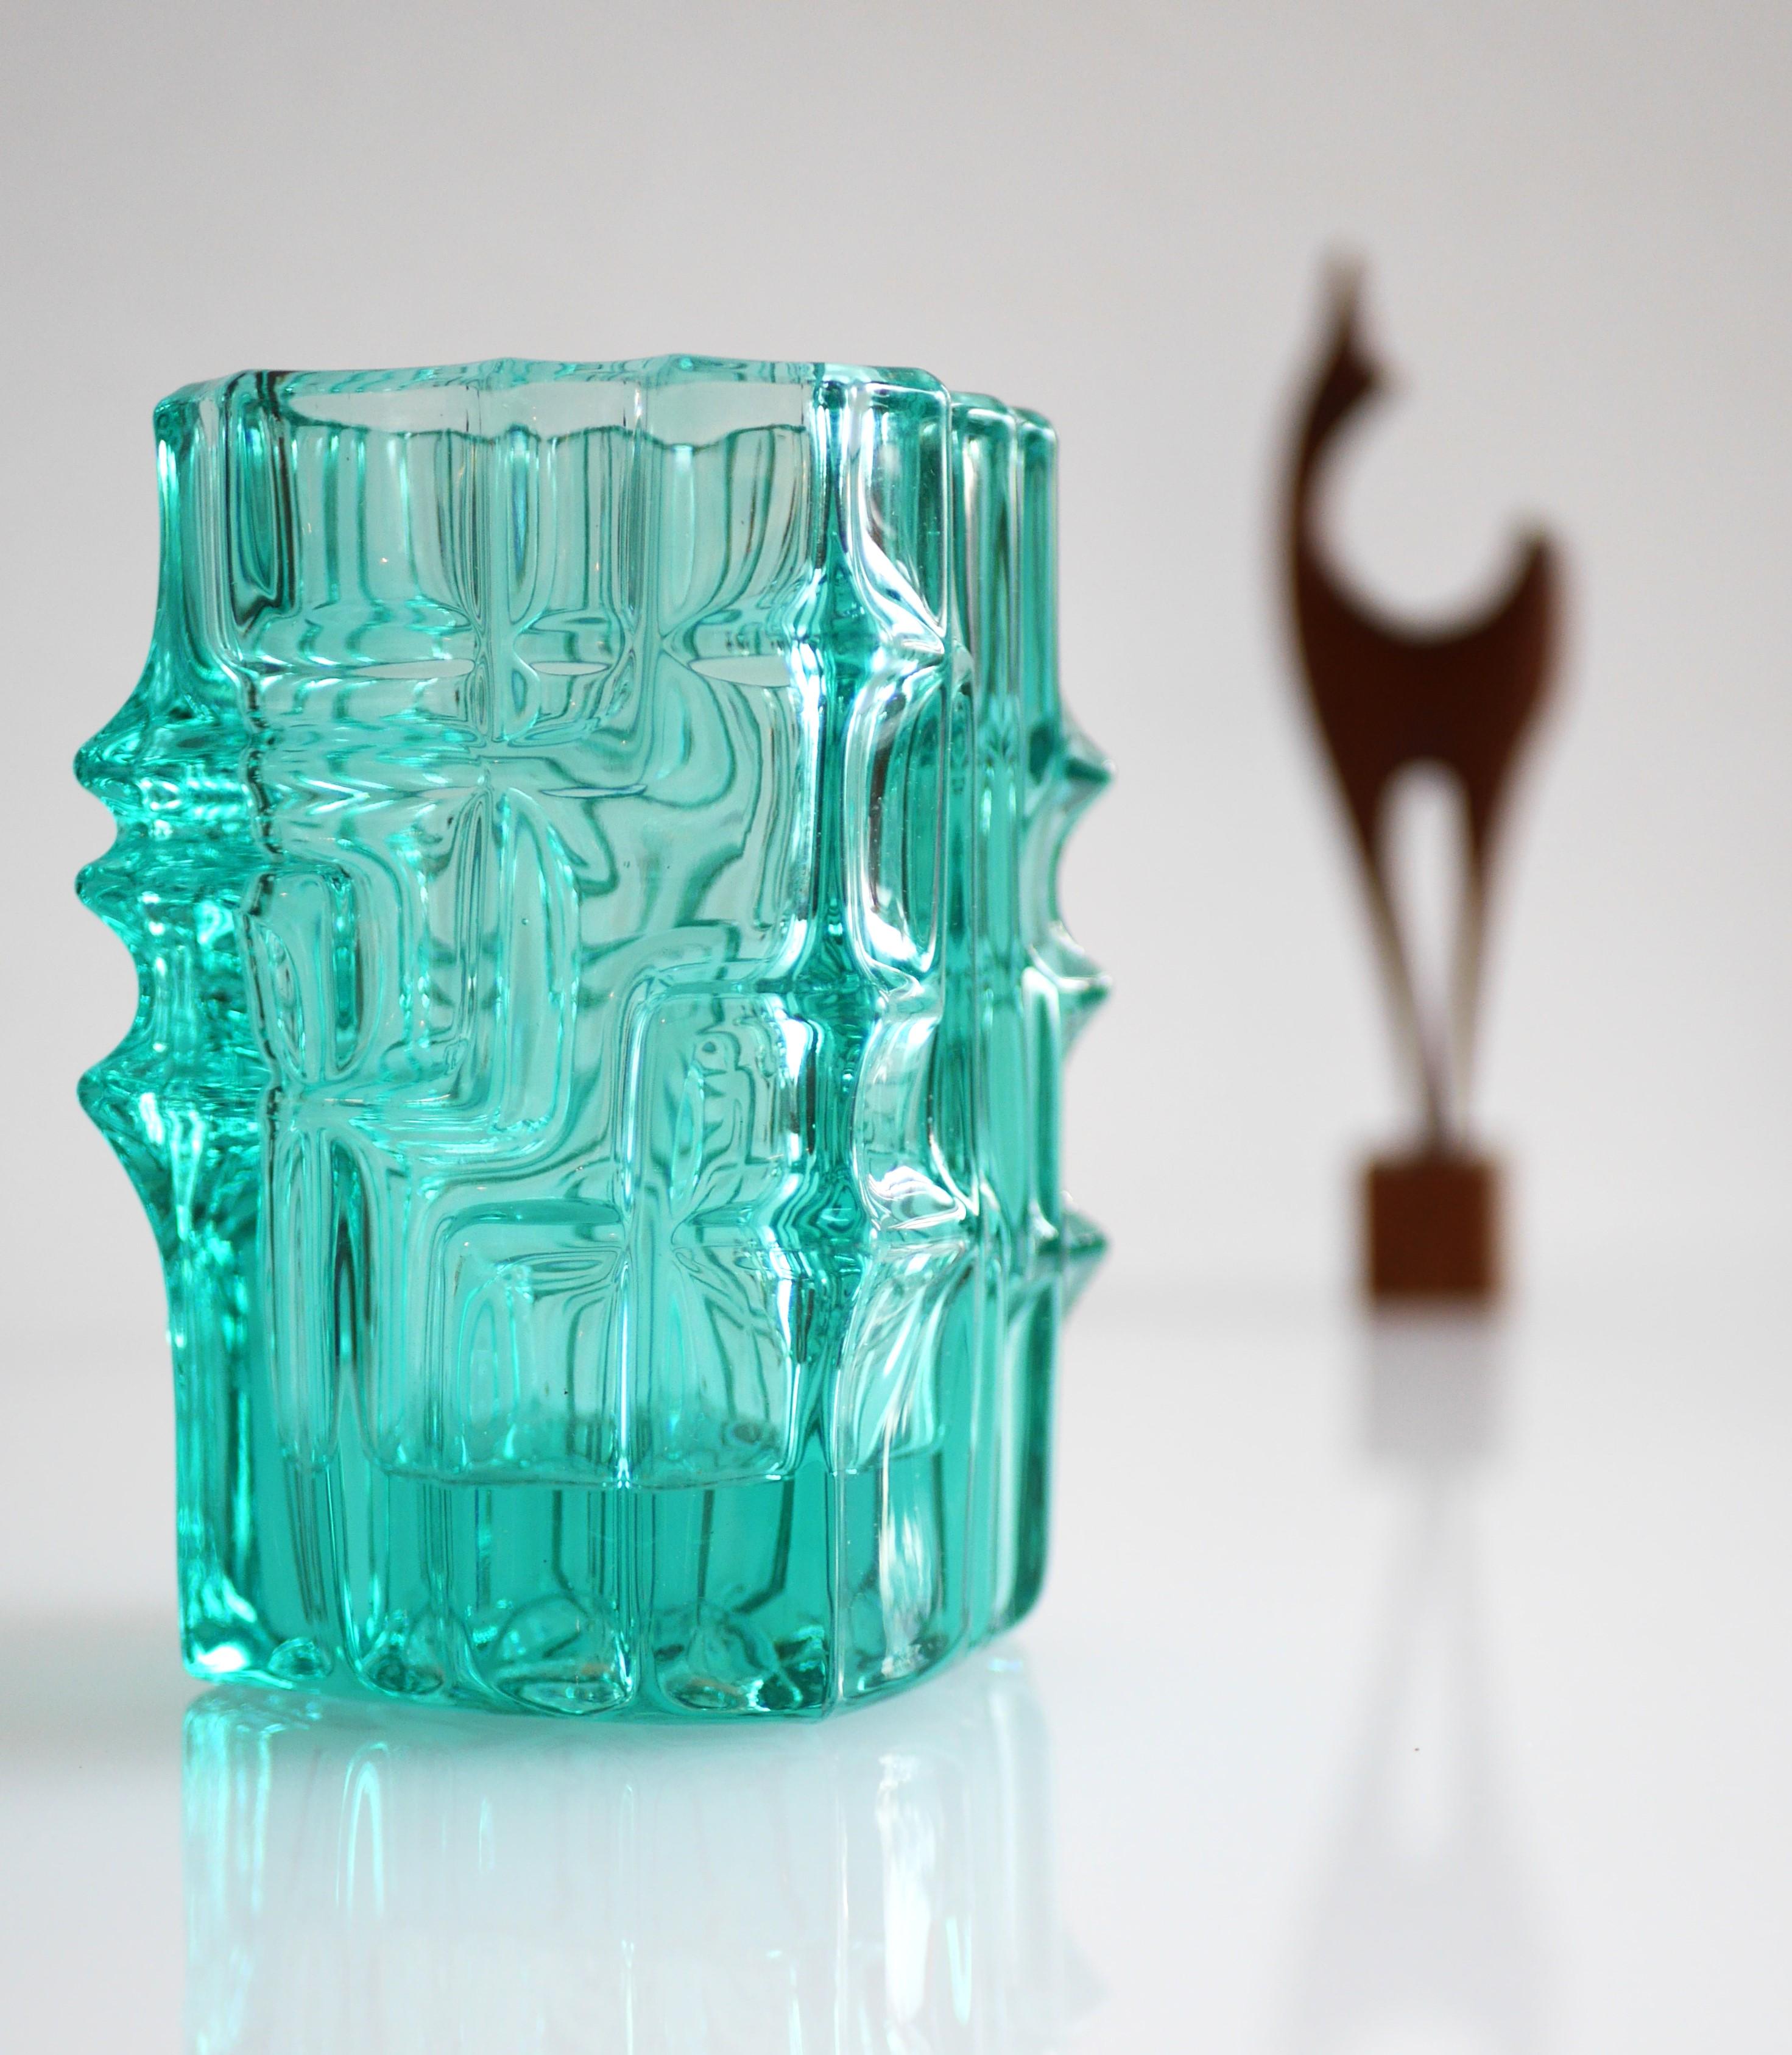 This is an amazing glass vase with a fantastic pale turquoise tone, by Vladislav Urban for Rocie works, SKLO UNION , 1960s - Mid Century Modern Czech glass. This is a rare statement piece, which will add to any interior setting! This vase is iconic,